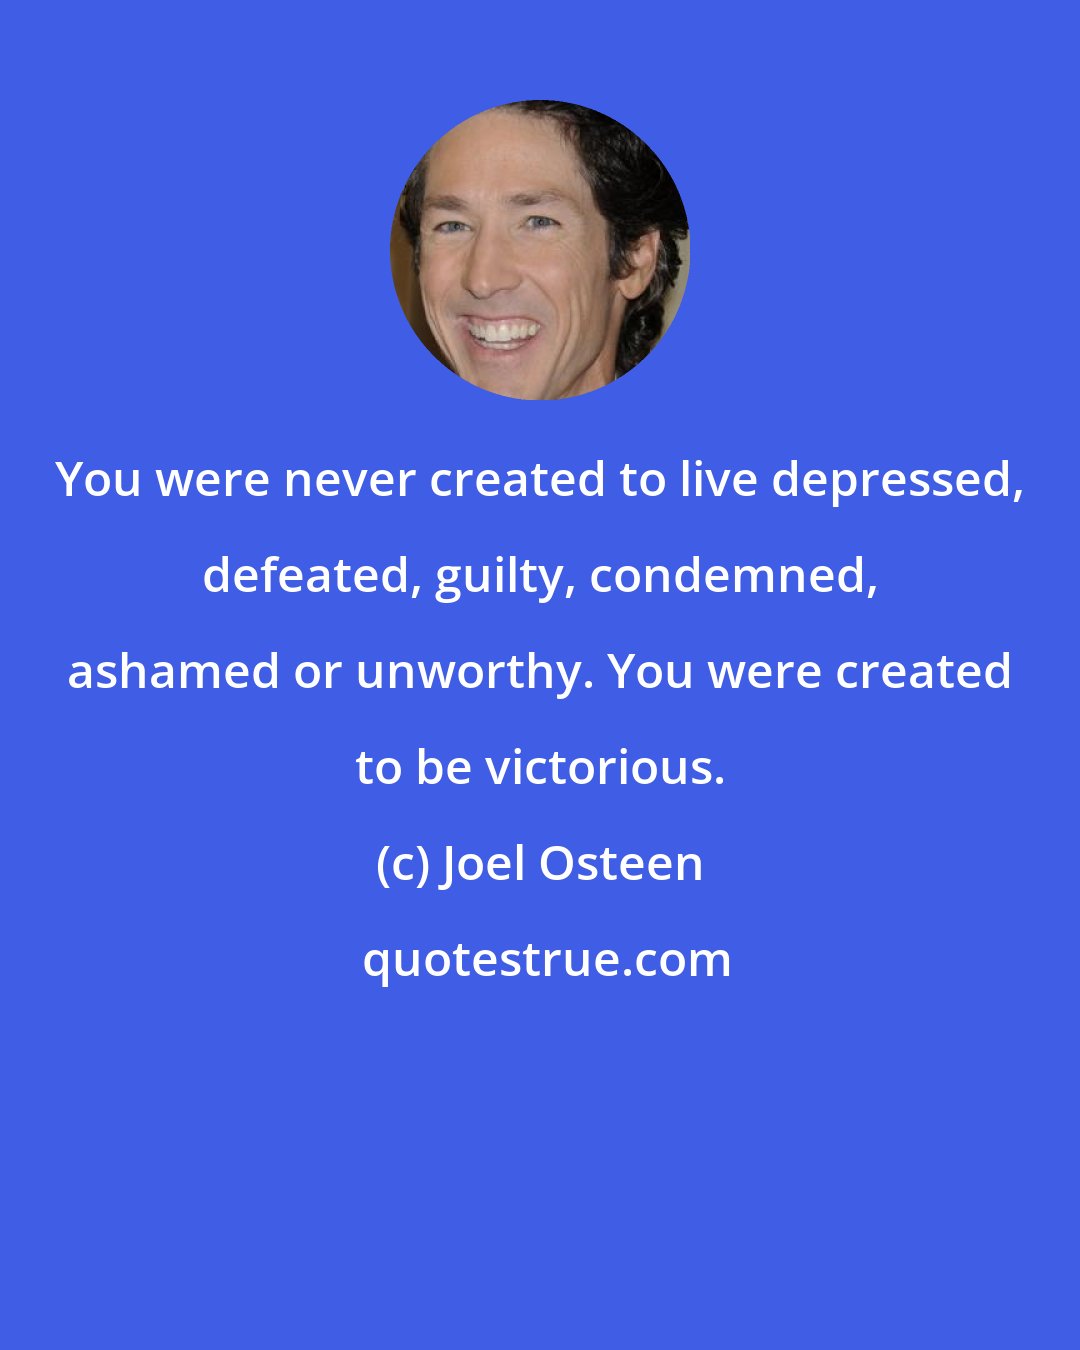 Joel Osteen: You were never created to live depressed, defeated, guilty, condemned, ashamed or unworthy. You were created to be victorious.